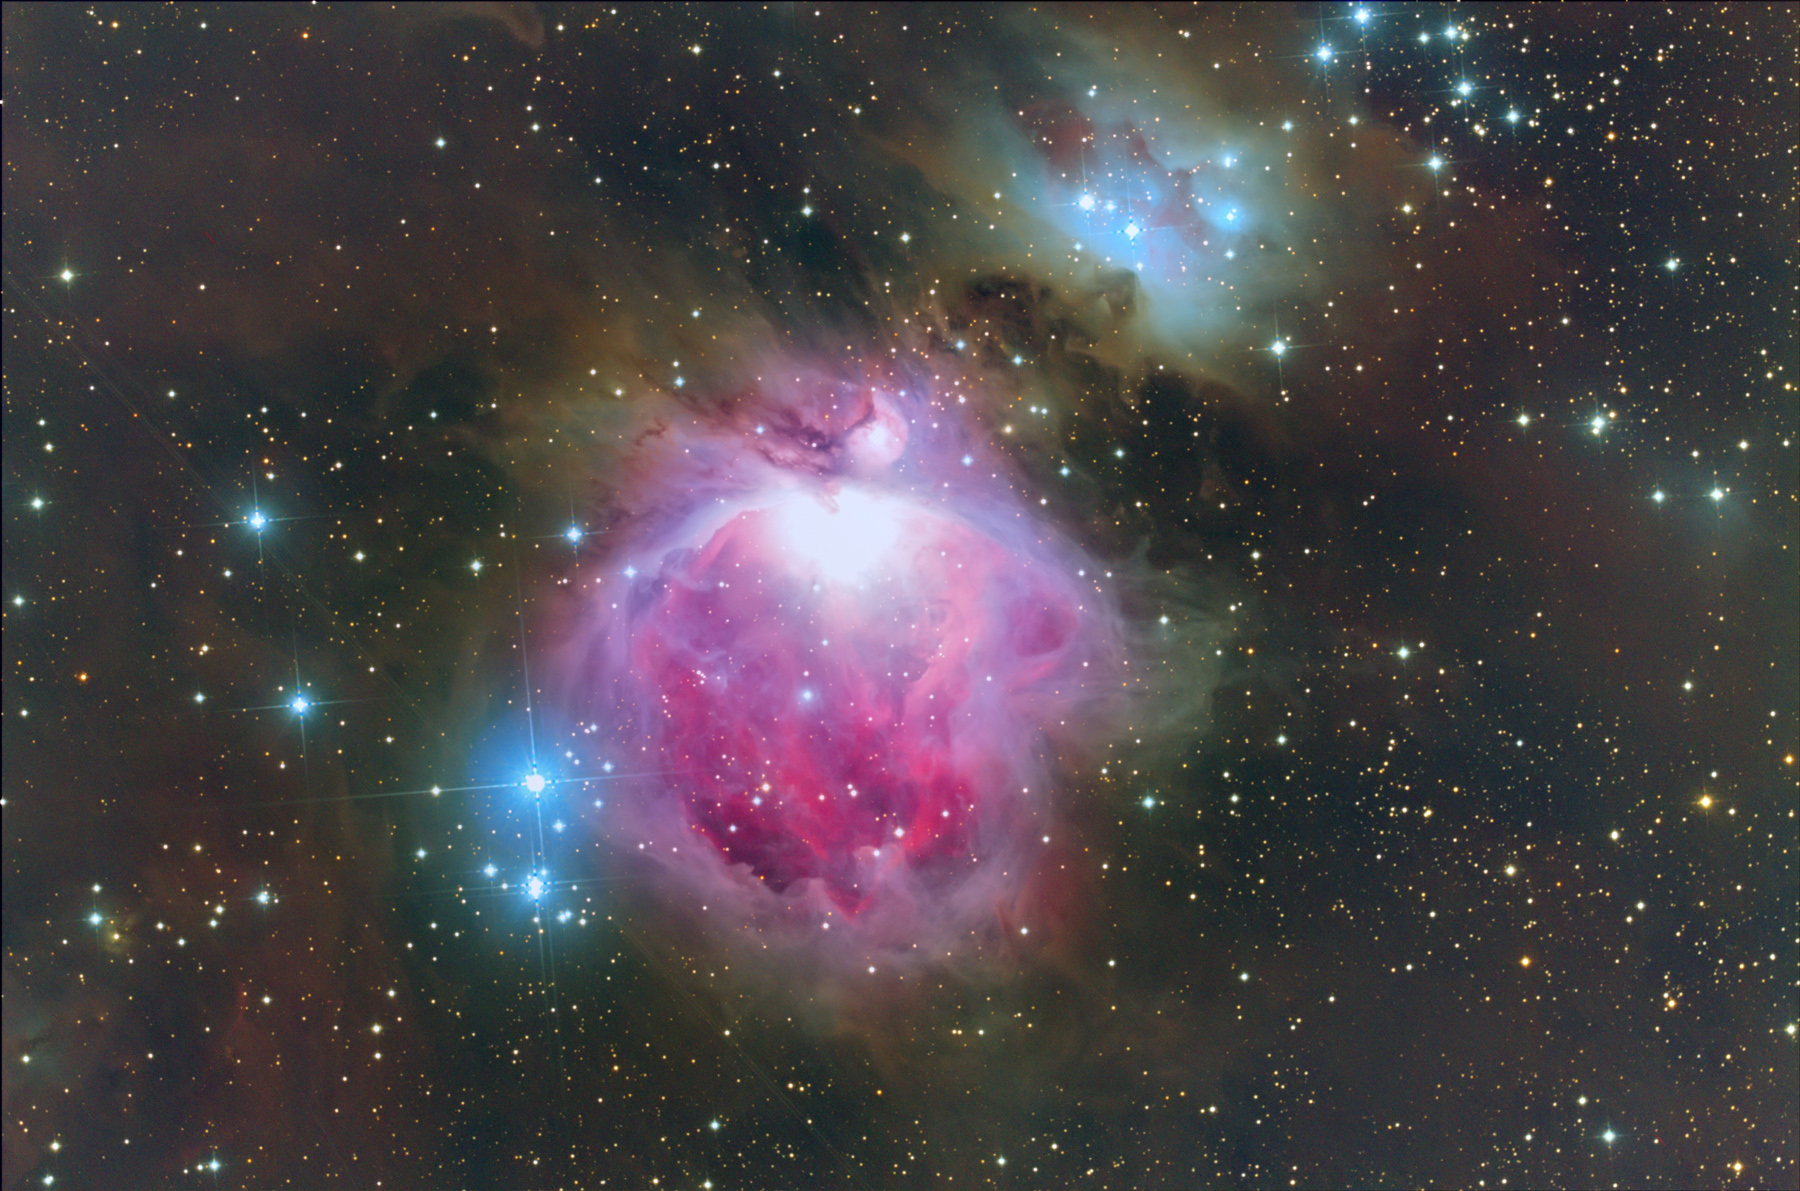 CombineFilesSigAvg-m42-matched-combined2-crop-gx-nw-1800.jpg